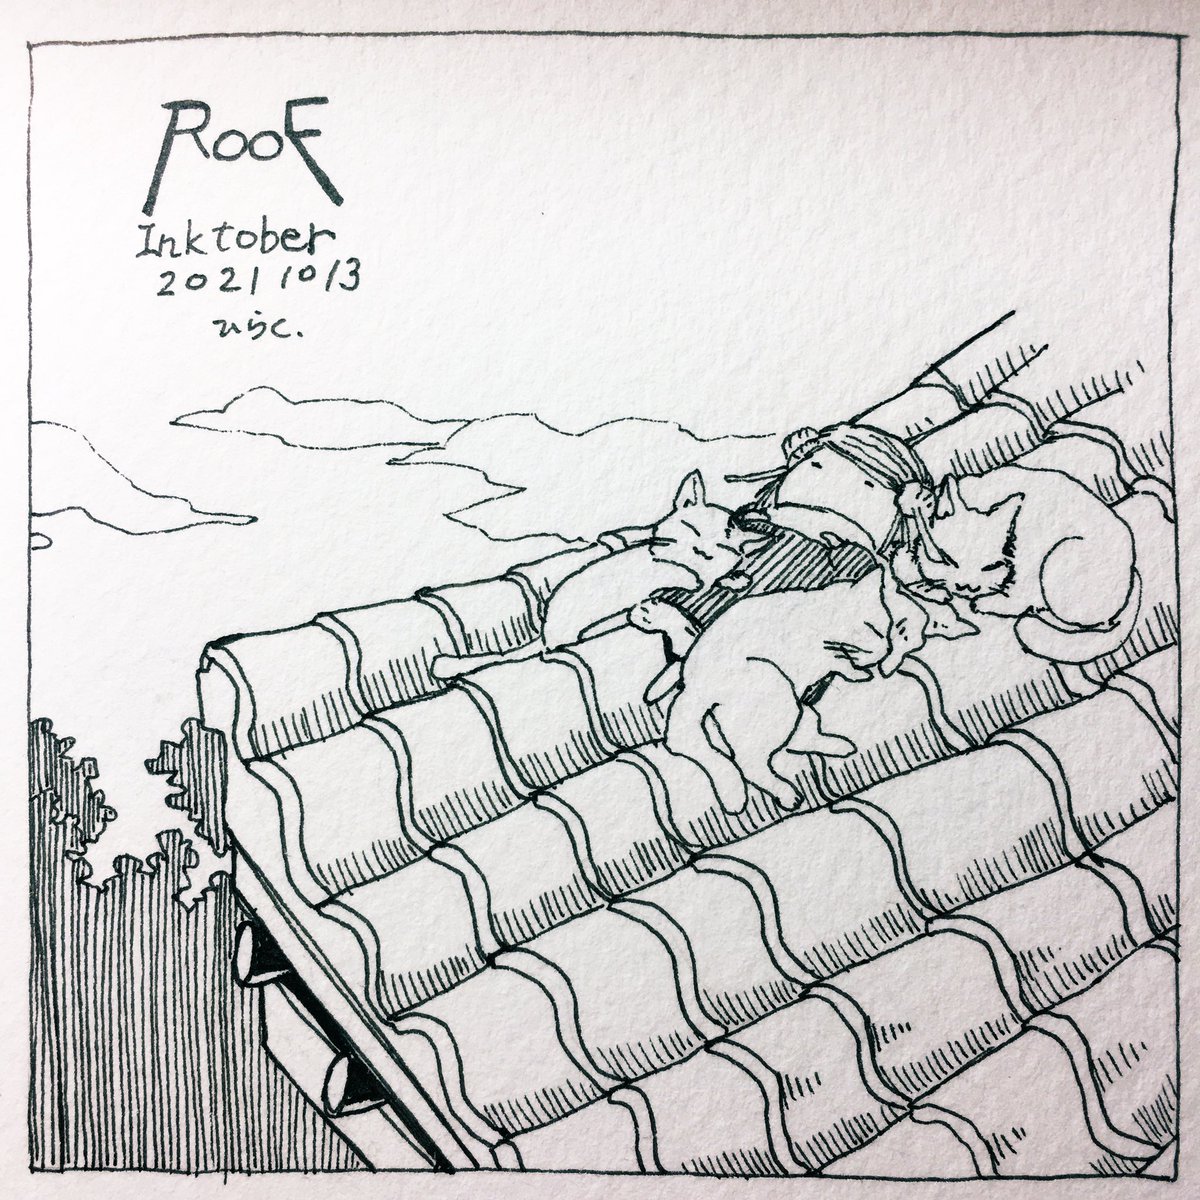 10/13: ROOF

眠りの中に波音が聞こえます。
We hear the sound of waves in our sleep.

#inktober2021 #inktober2021day13 #Pavot #ペン画 